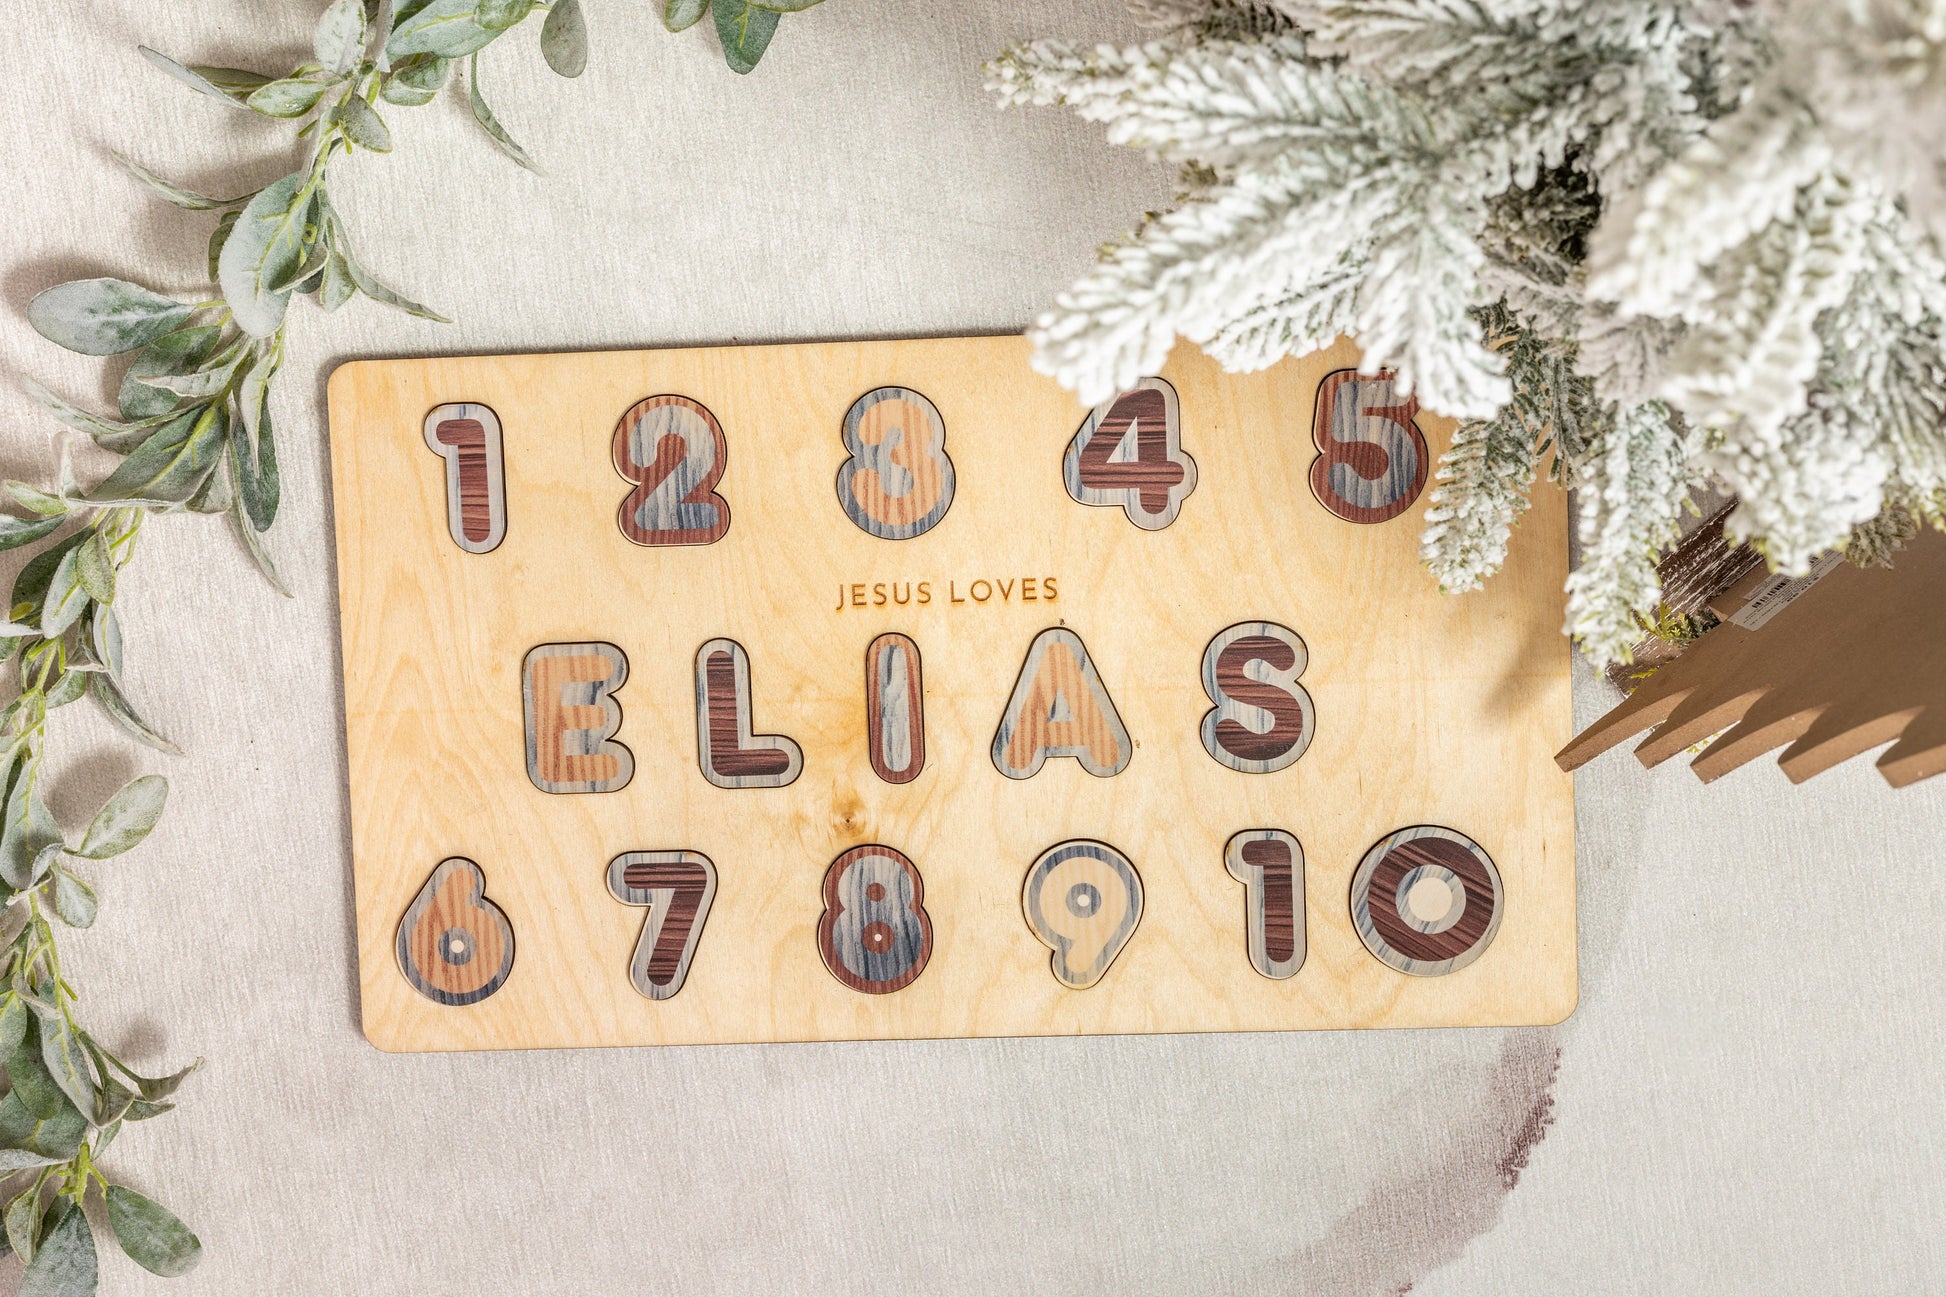 Personalized Name Puzzle with Numbers - Baby Gift - Christian Nursery Decor - Christmas Baby Gift - Bible Promise - Boho Home Decor